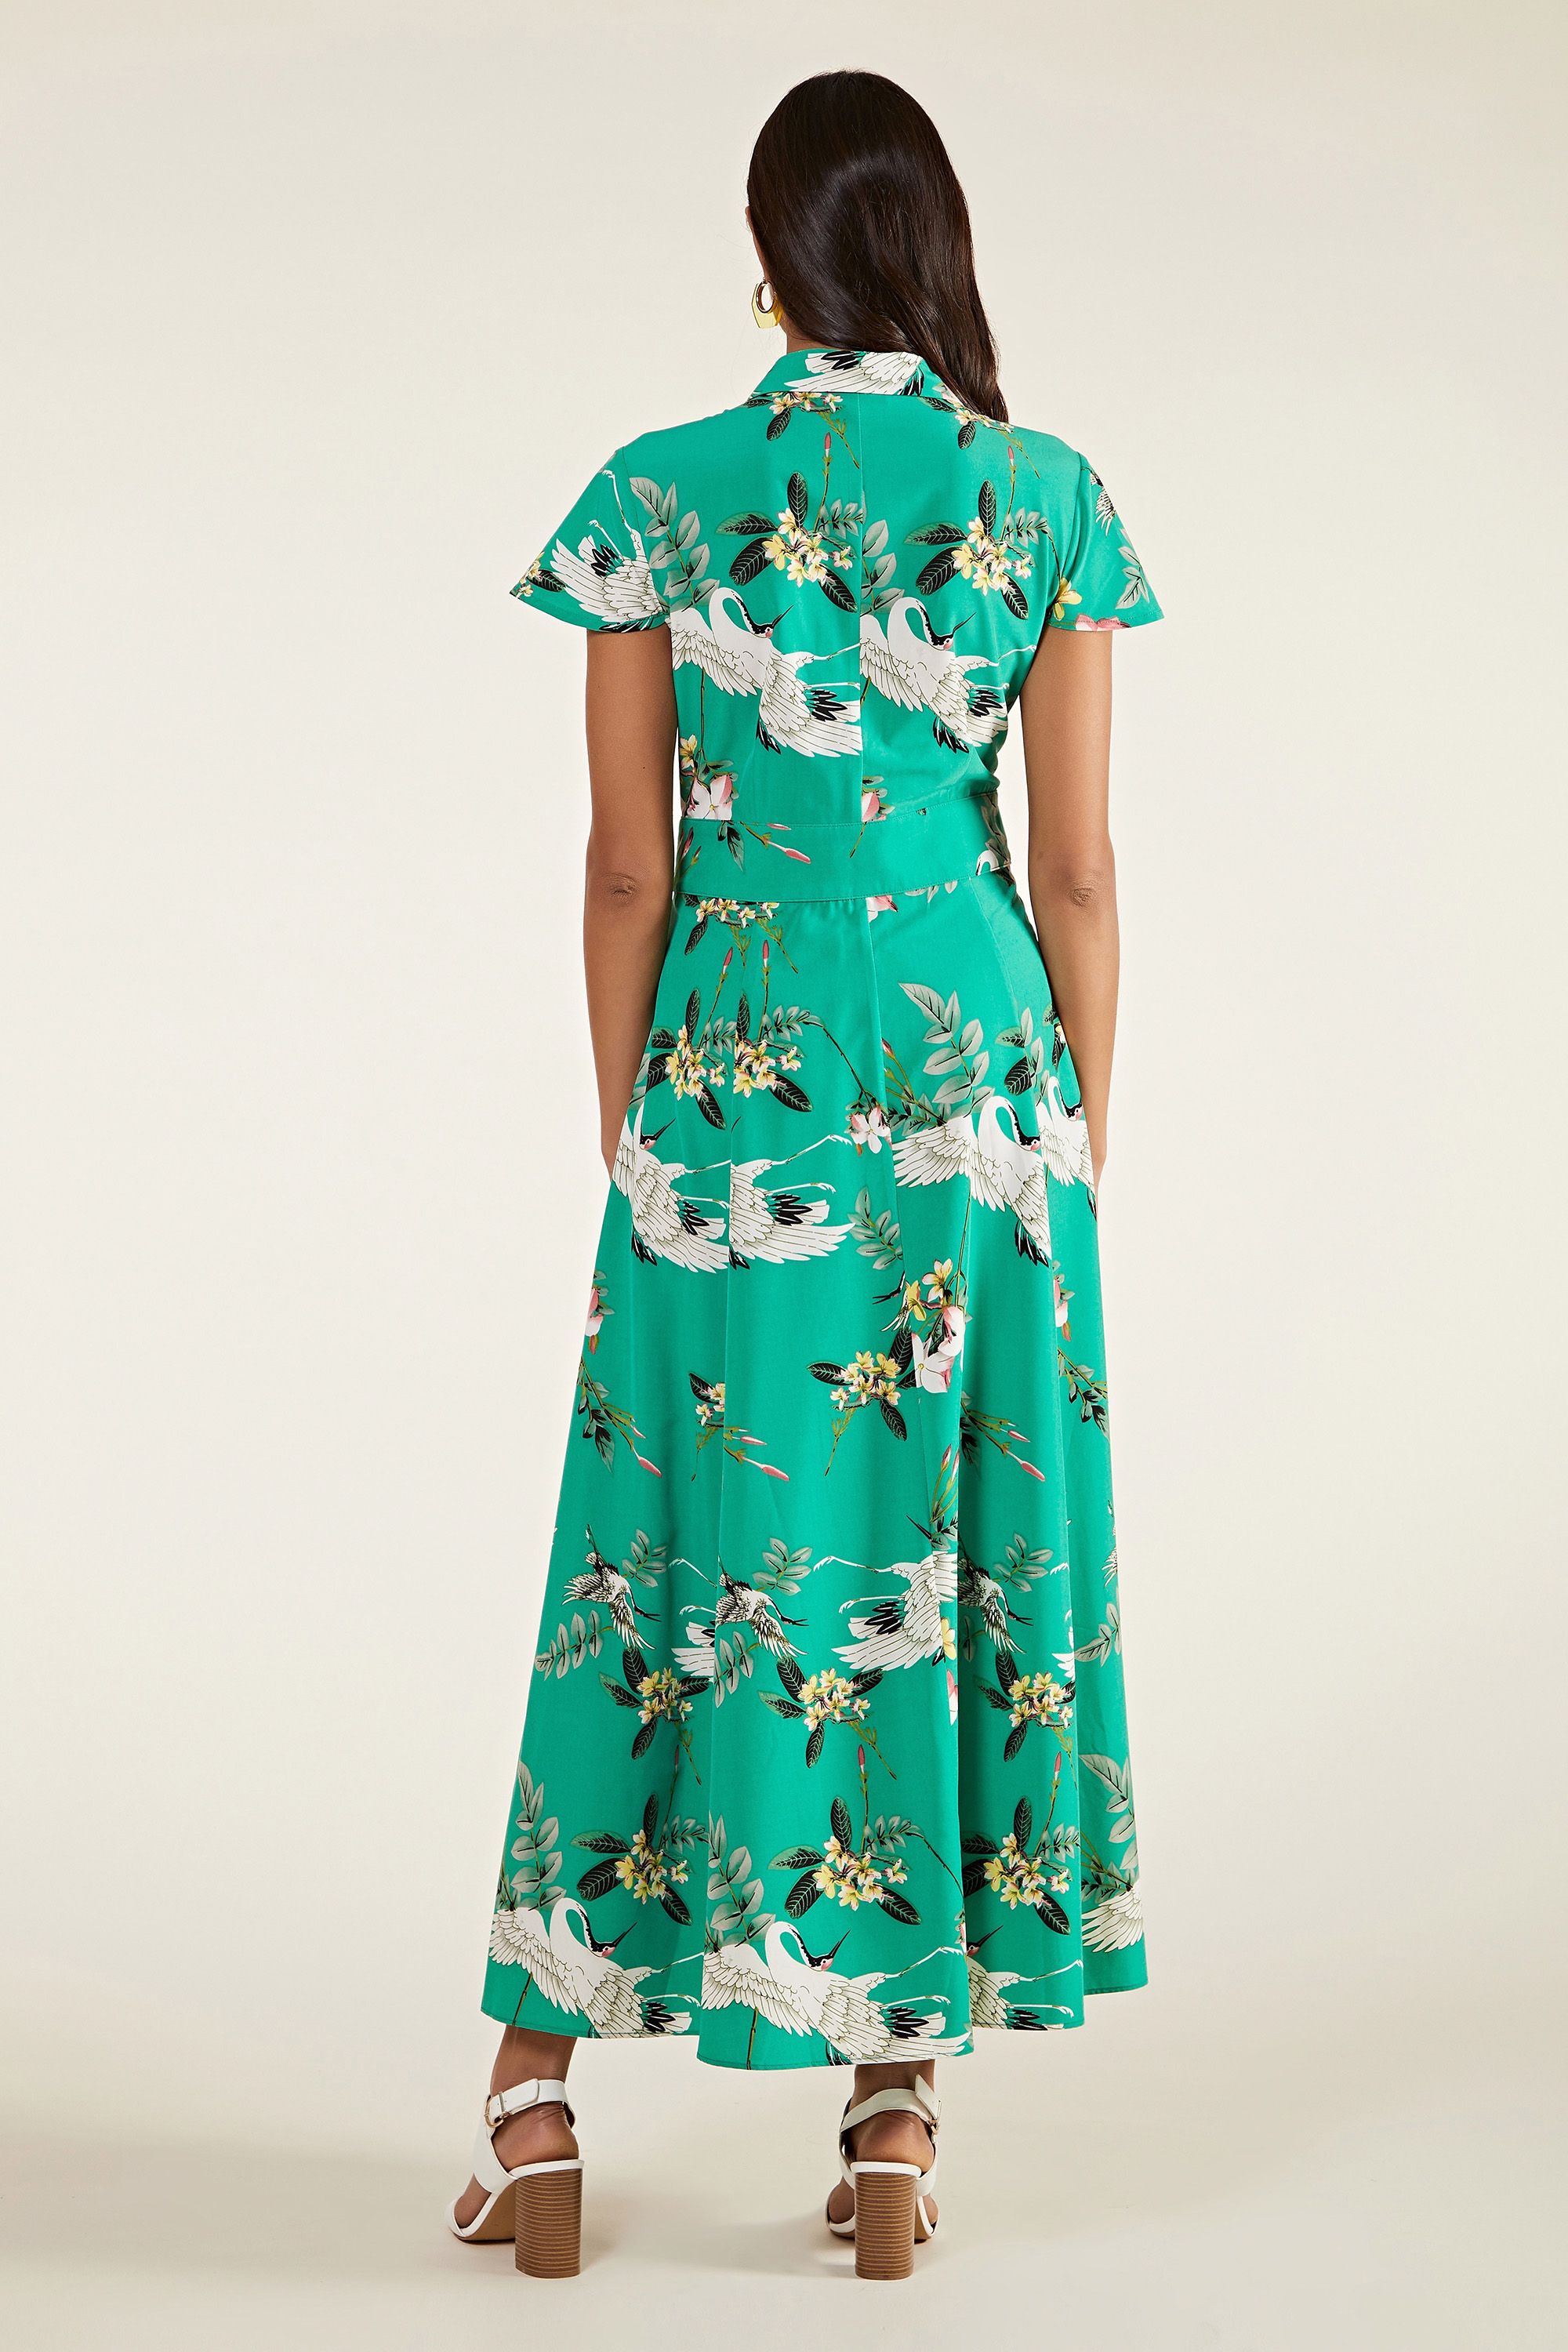 A look with high impact, this Bird Print Maxi Dress will inject your wardrobe with invigorating colour. Draping to the ankle, it's designed with a shirt bodice and a flowing skirt. Faux-pearl buttons run through the silky-soft fabric, detailed with an iconic crane print. The perfect dress for those warm holiday evenings, dress it up with block heels and a statement clutch. 100% Polyester. Machine Wash At 30. Length is 135cm/53inches.